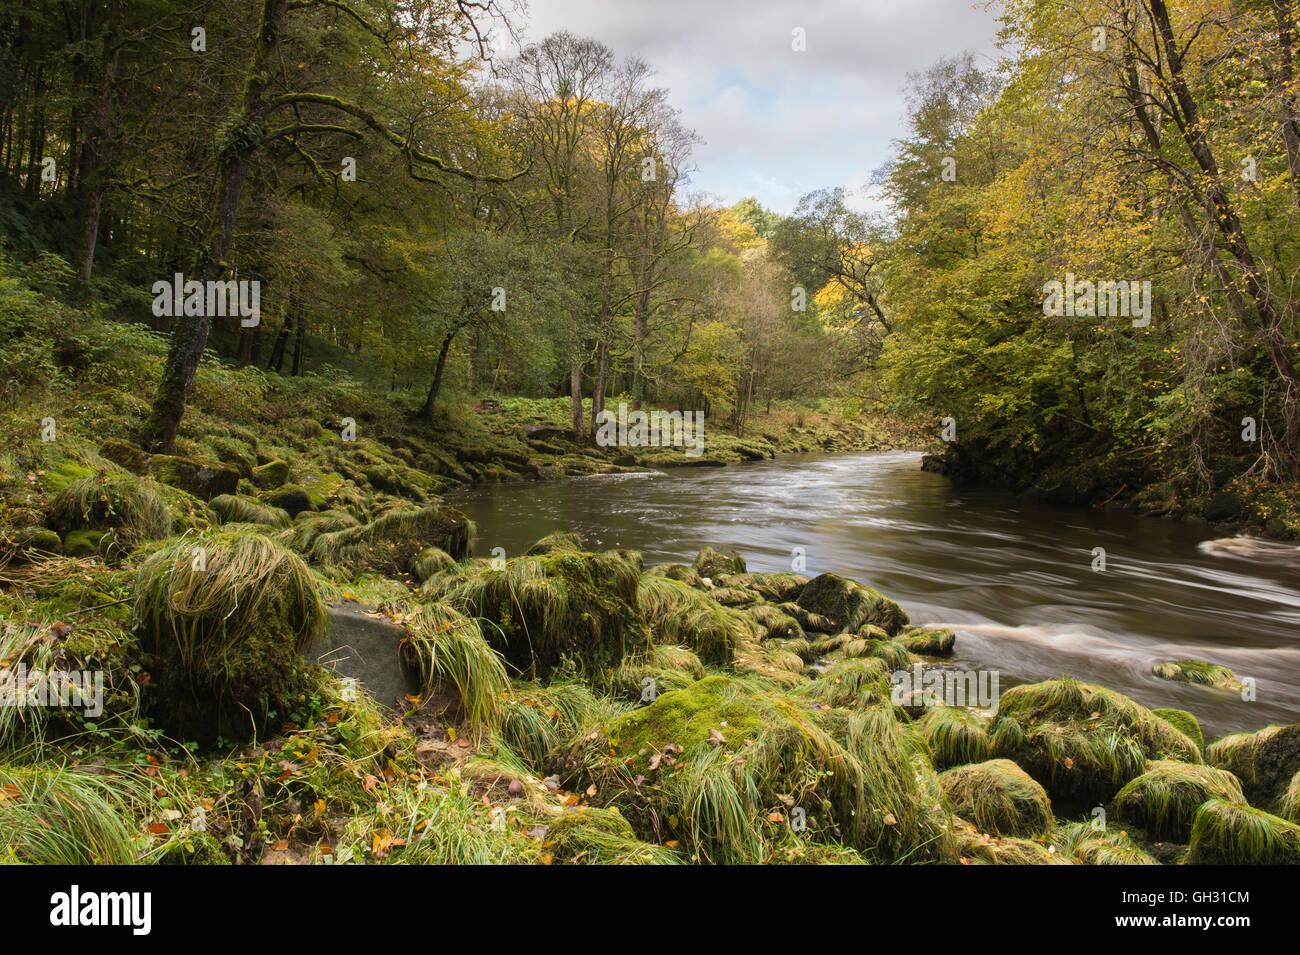 Autumnal scenic Strid Wood (ancient woodland) & rocky, mossy banks of smooth, flowing River Wharfe - Bolton Abbey Estate, Yorkshire Dales, England, UK Stock Photo